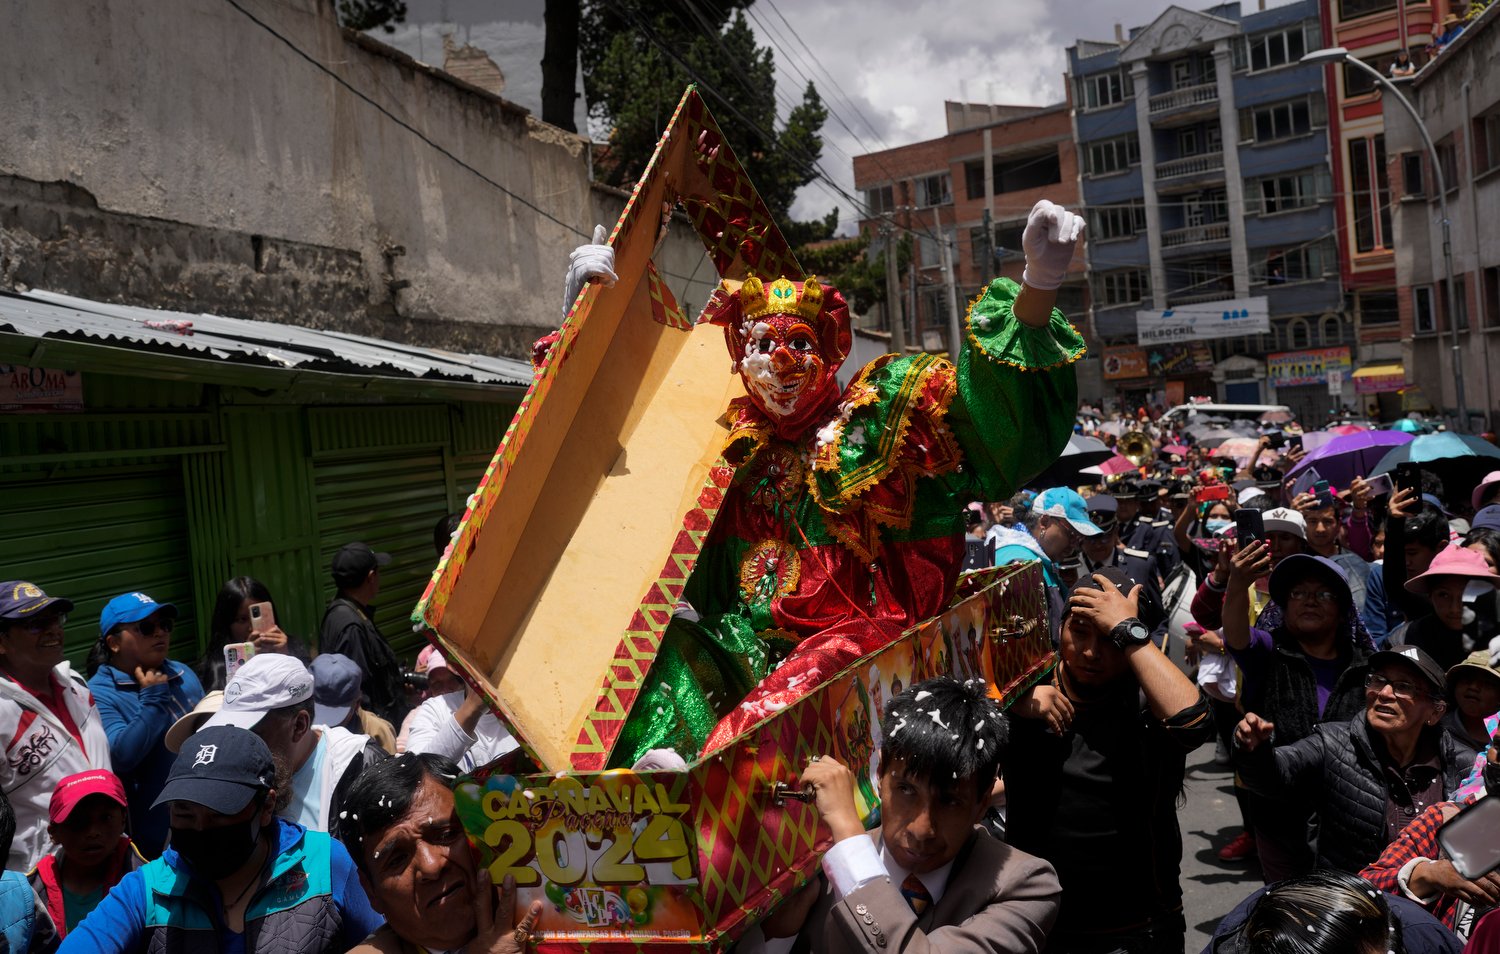  People take part in a procession to open the Carnival season with the symbolic unearthing of Pepino, one of the three main Carnival characters who represents joy, in La Paz, Bolivia, Jan. 21, 2024. (AP Photo/Juan Karita) 